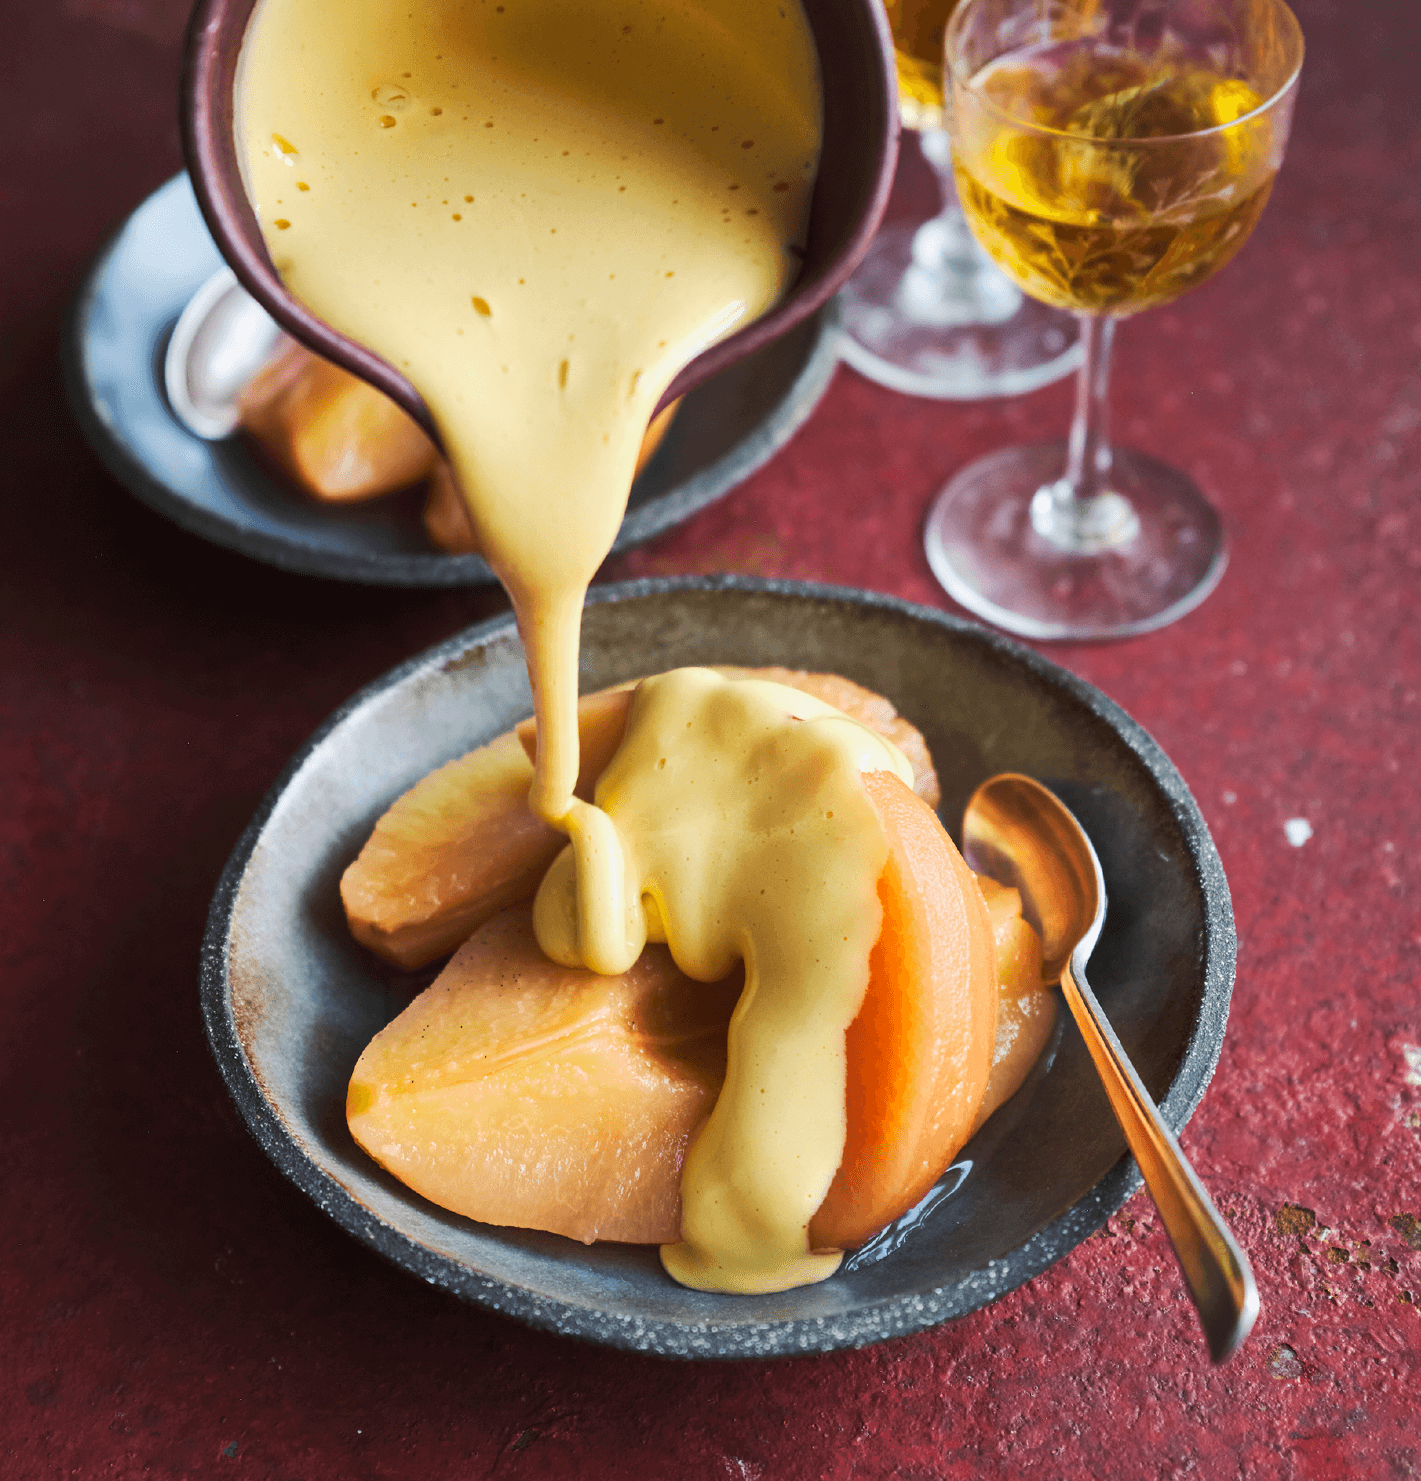 zabaglione being poured over some slices of poached quince